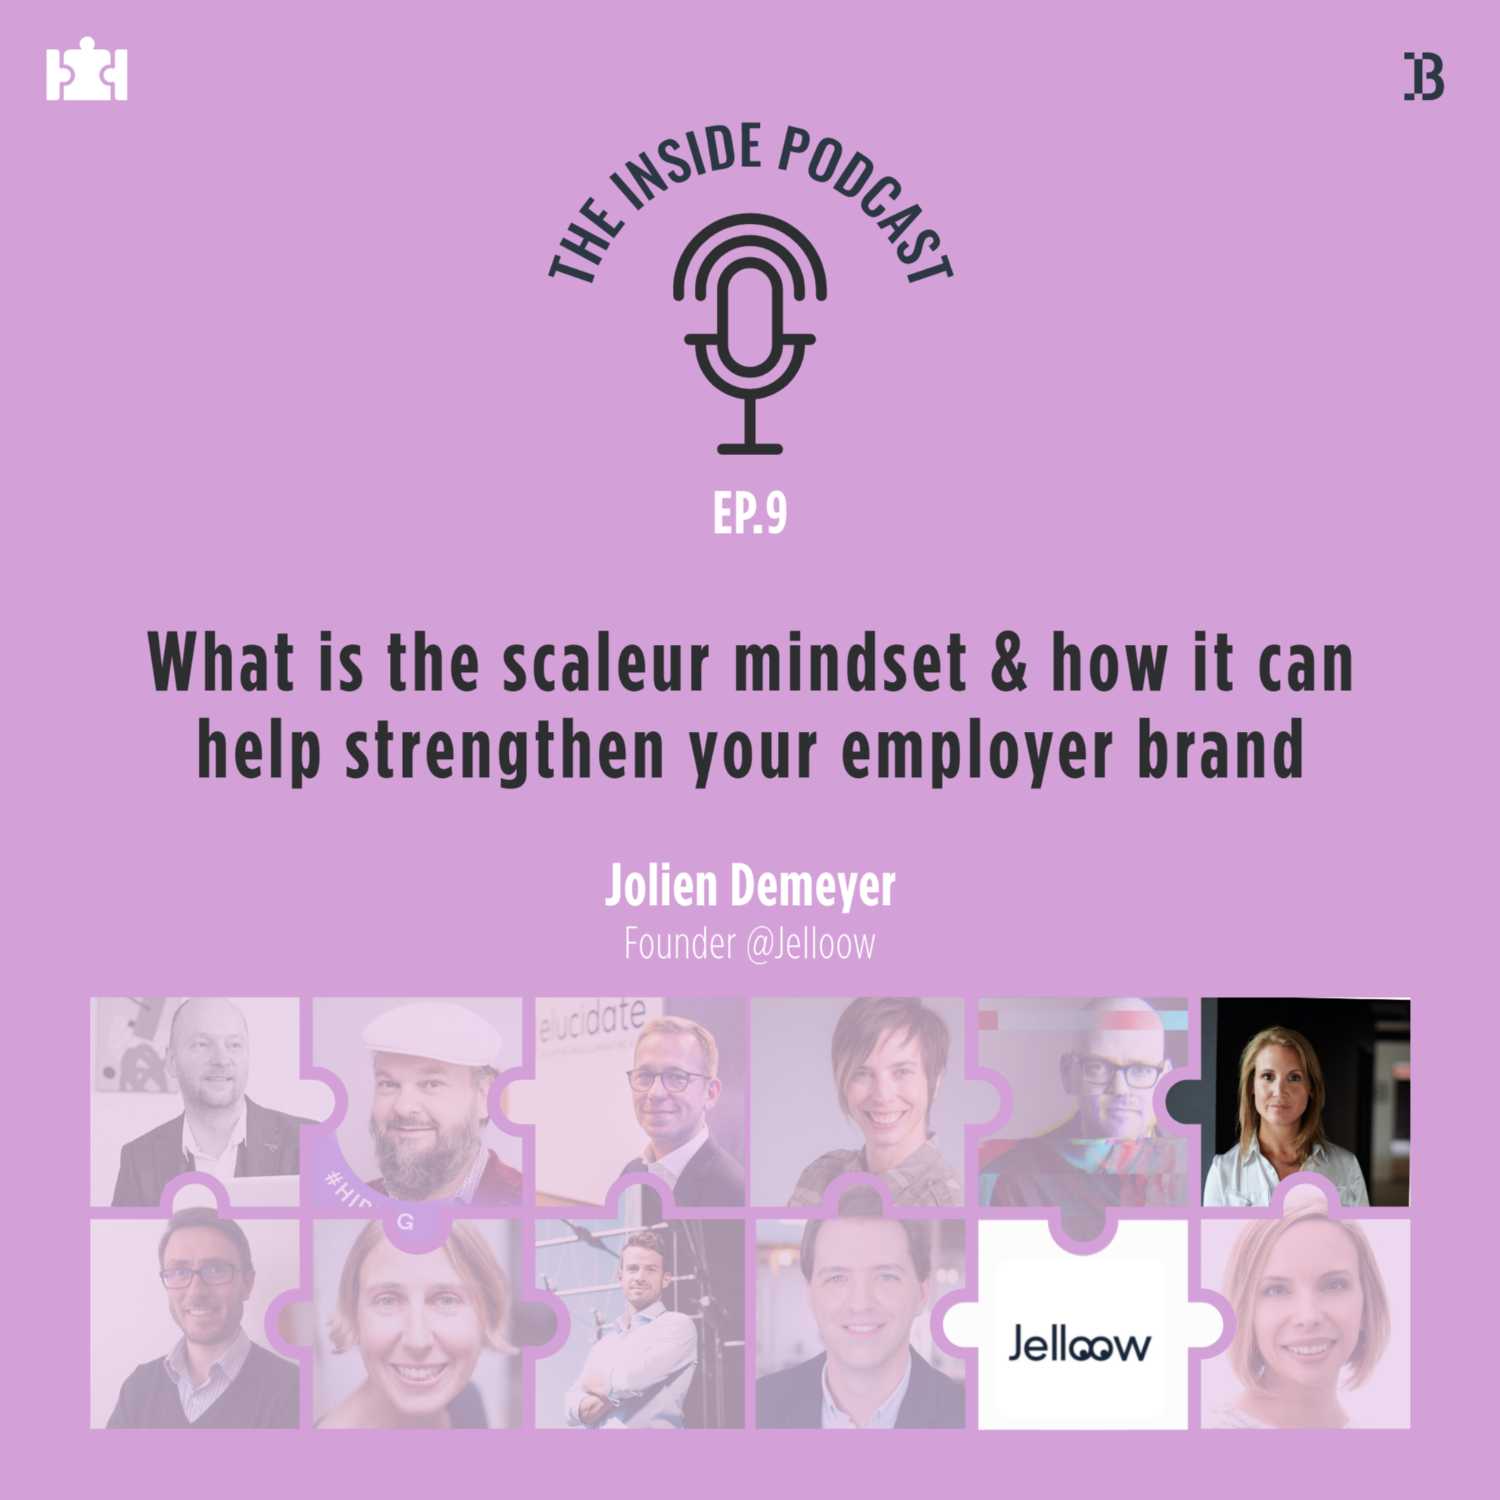 Employer Branding T.I.P S05Ep.9 | “What is the scaleur mindset & how it can help strengthen your employer brand”, with Jolien Demeyer, Founder @Jelloow